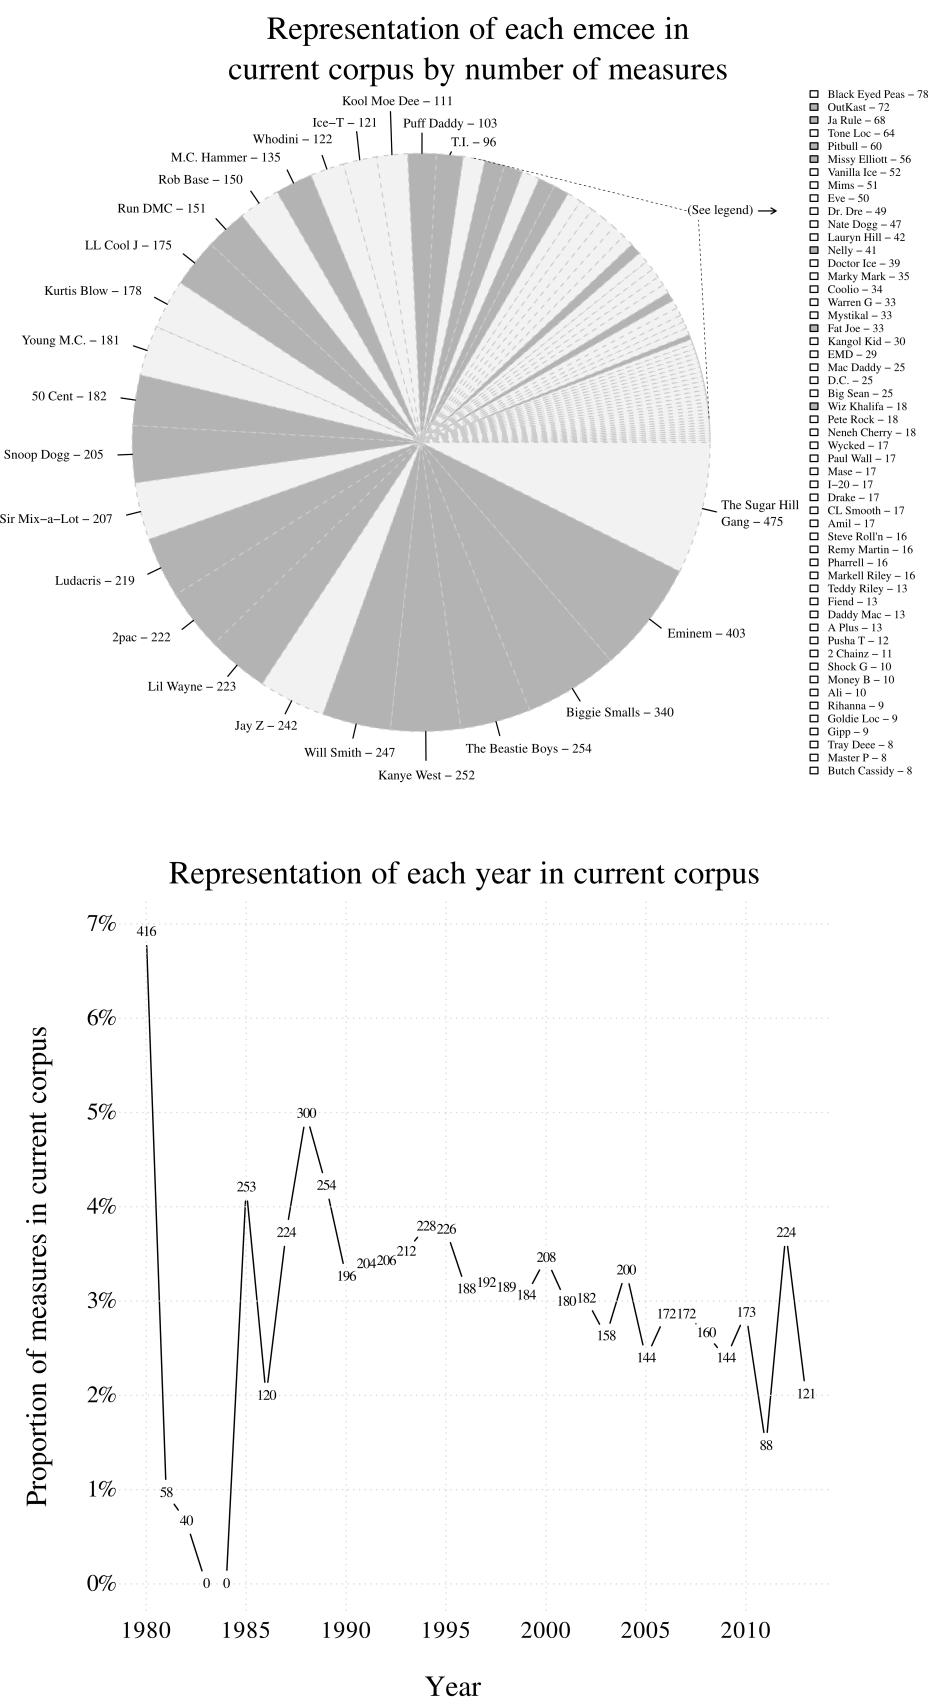 Image showing a pie chart showing the representation of emcees by number of measures and a graph plotting the representation of each year in the current corpus